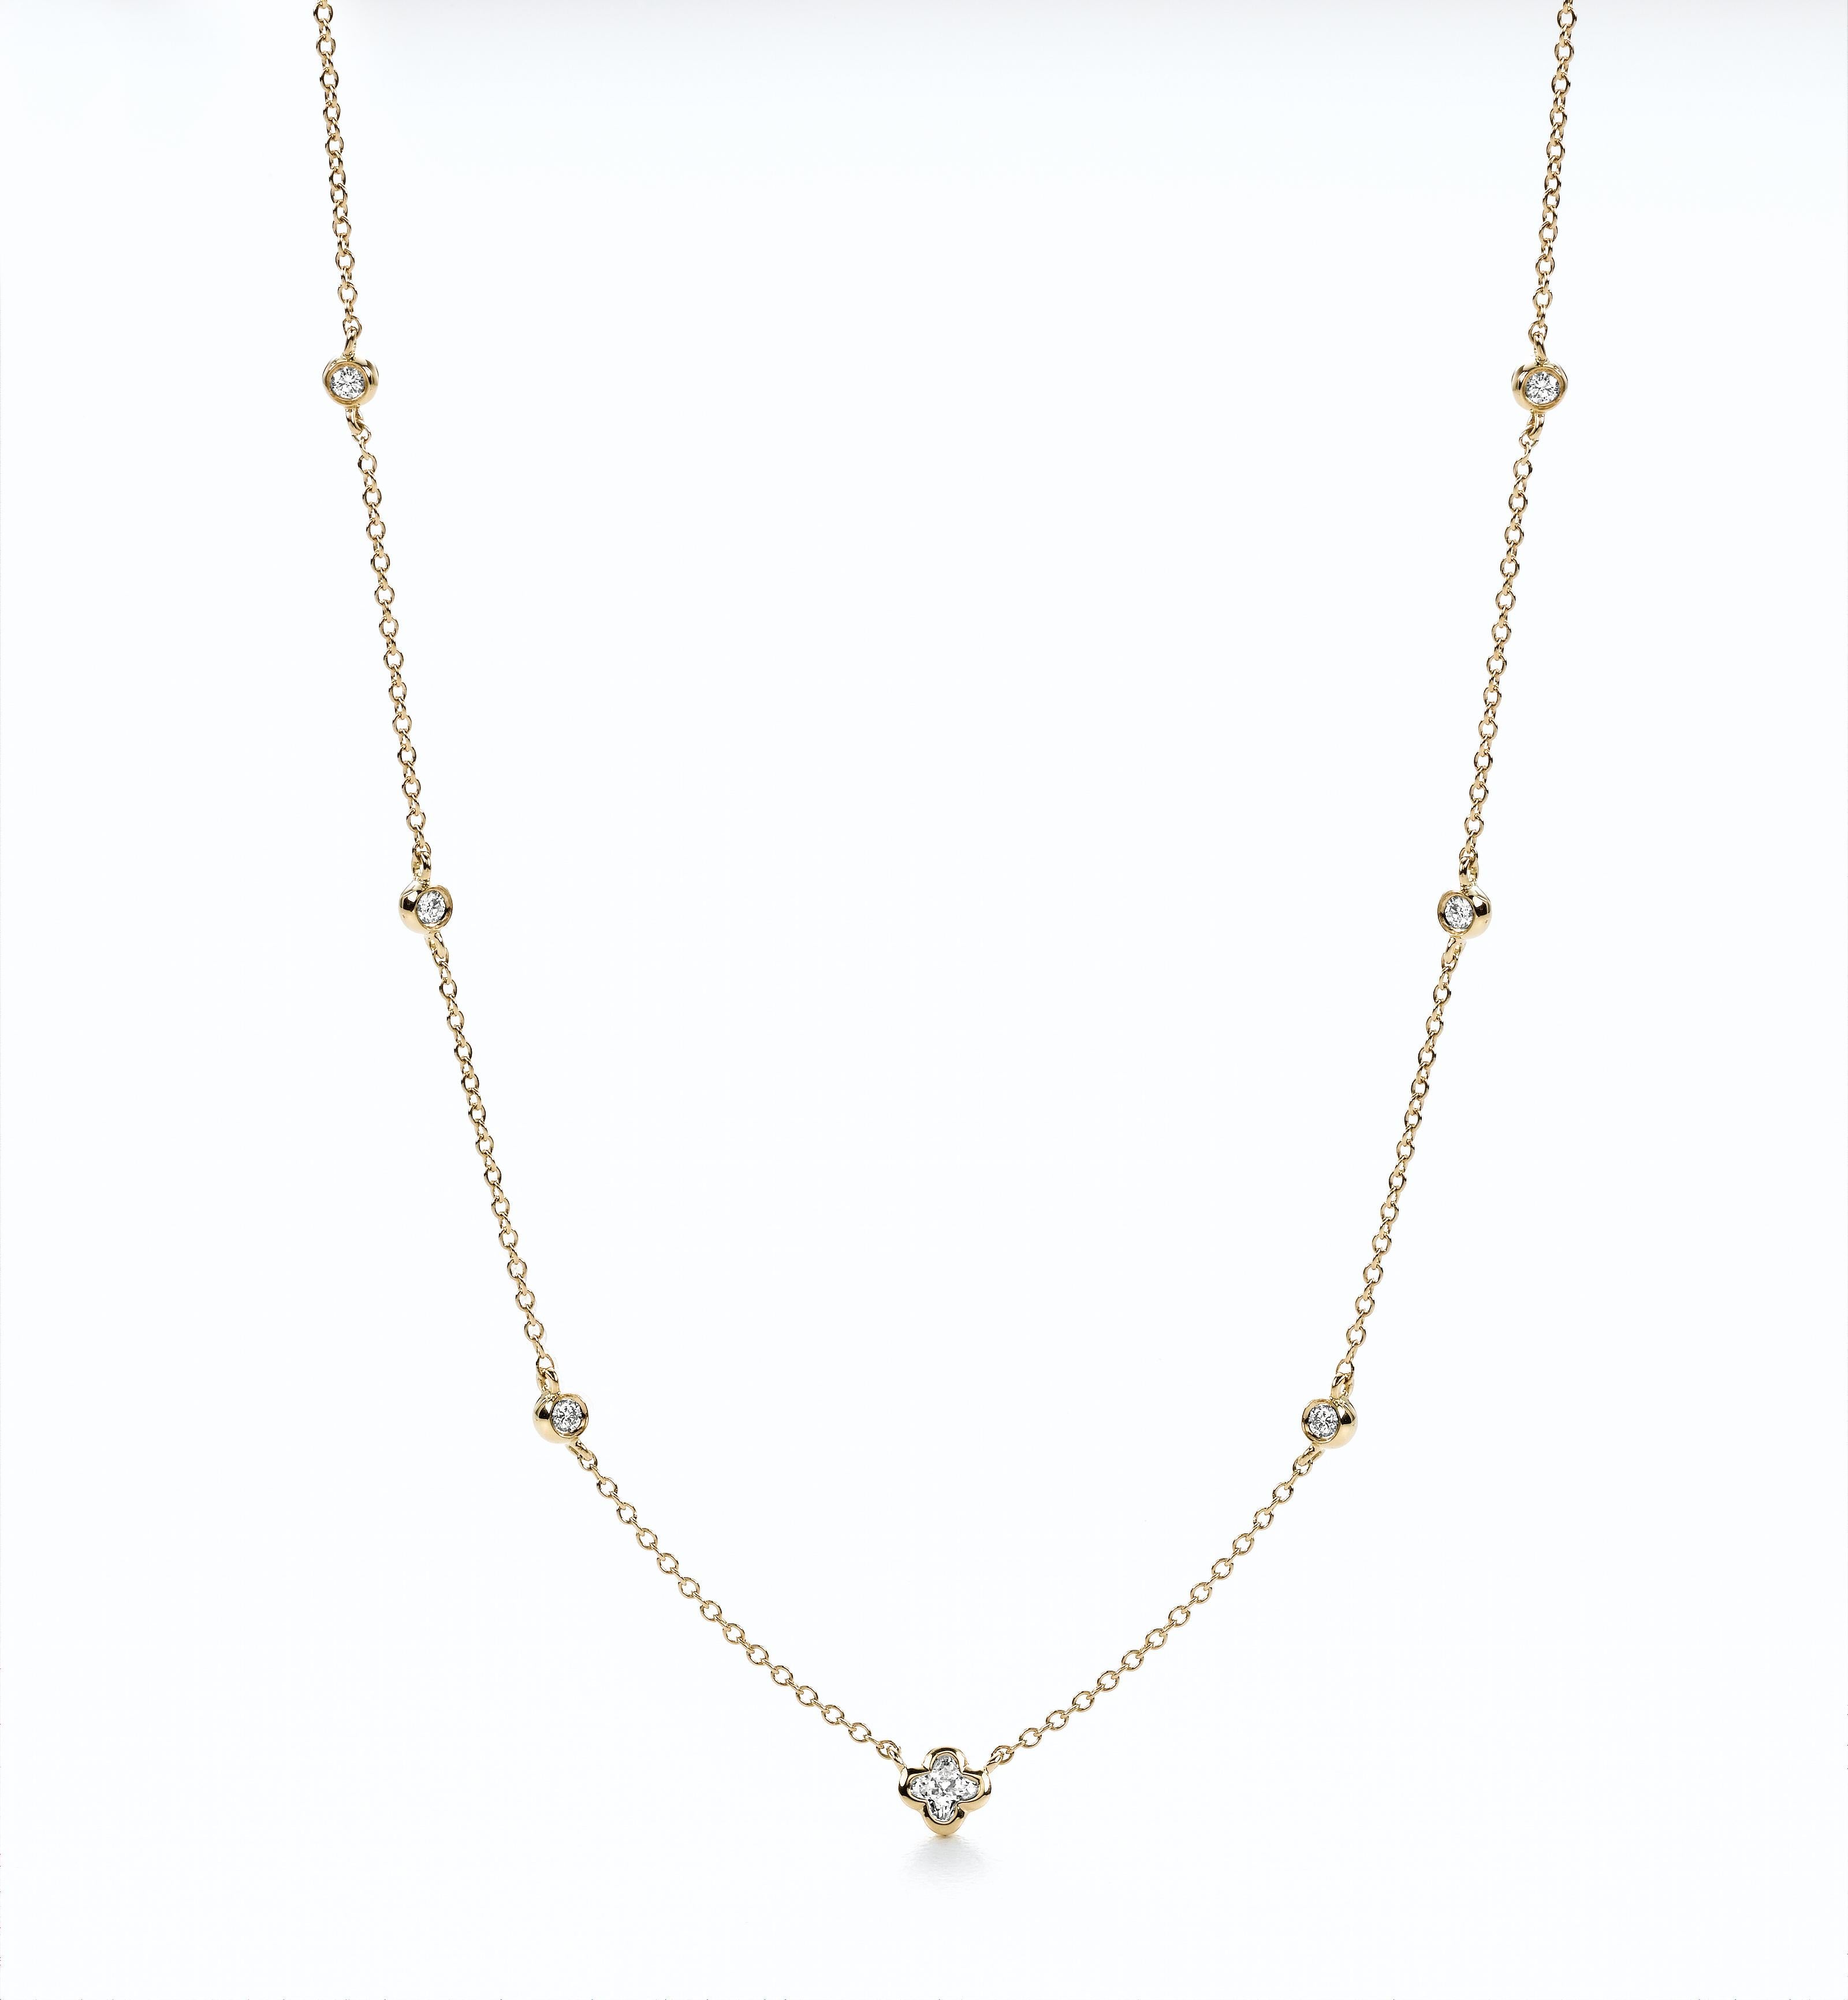 18KTyellow gold station diamond round and flower necklace. 1  LILY CUT ® flower shape diamond H color VS SI clarity  0.18 cts . additional 0..17 ct round diamond accent .   17 inch with a link to shorten to 16 inch . 